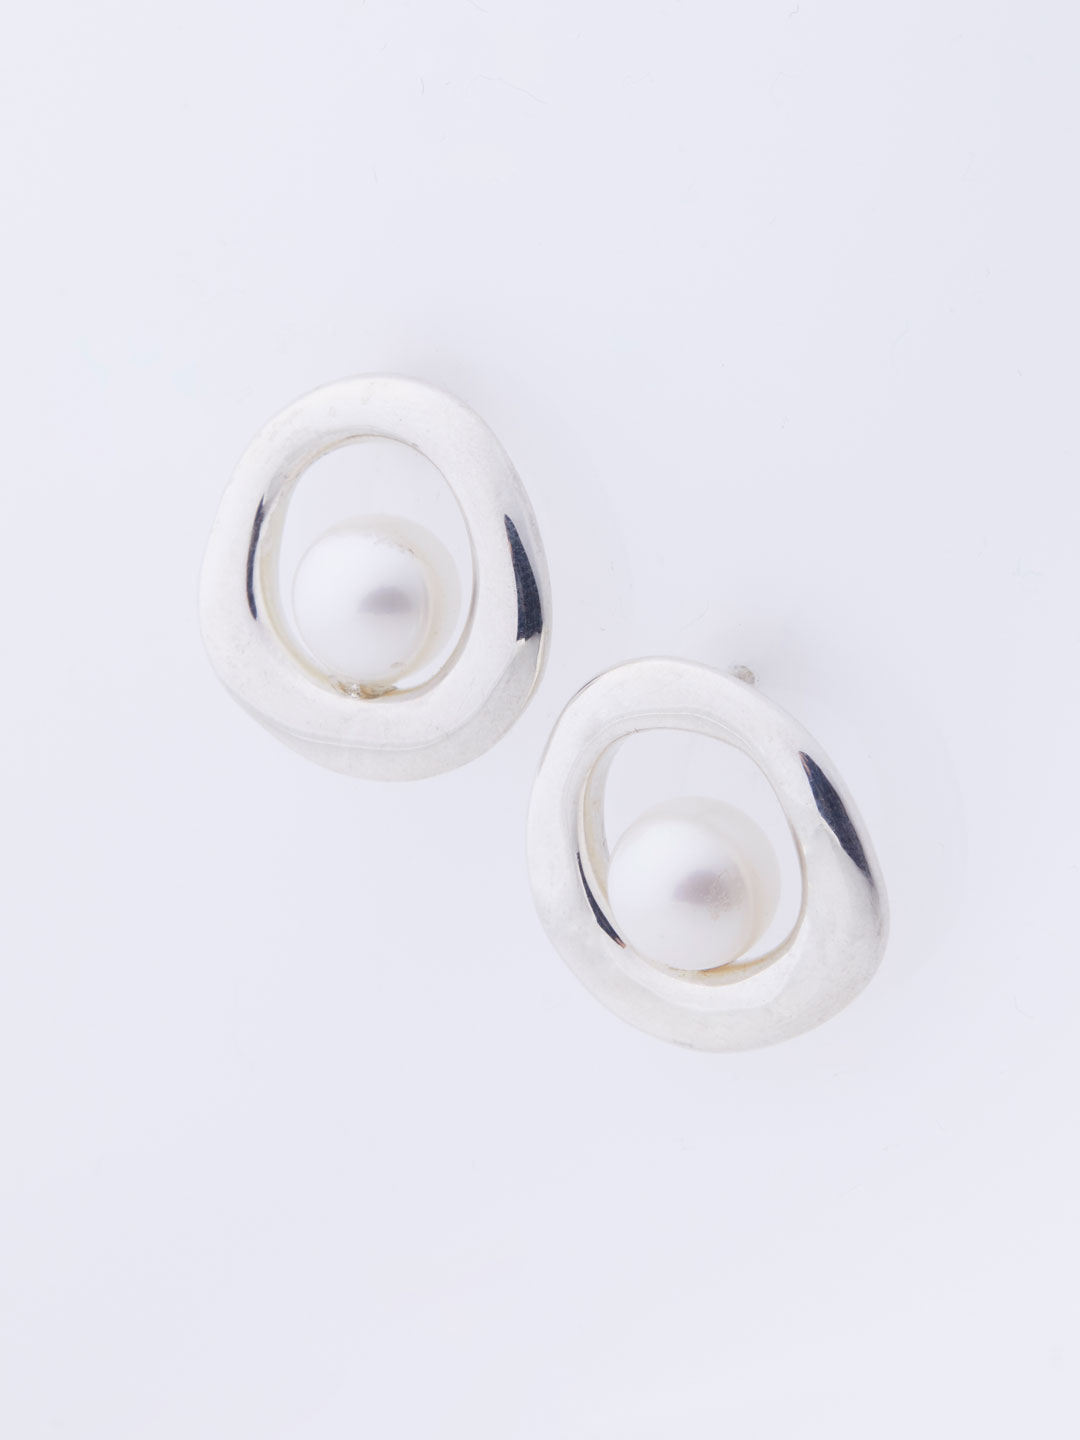 Nested Pearl Imperfect Circle Pierced Earrings - Silver